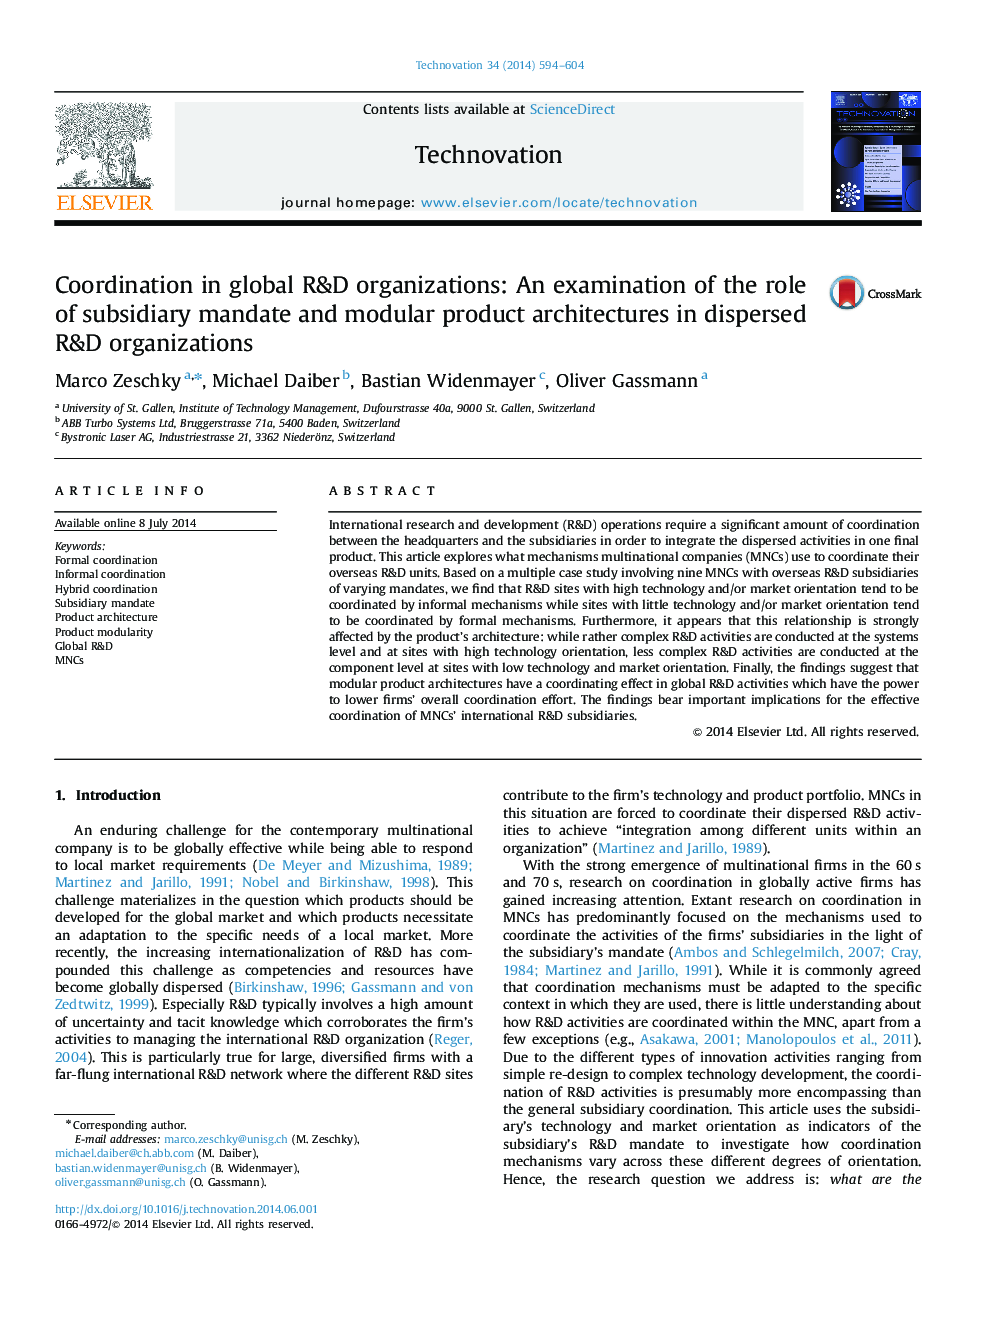 Coordination in global R&D organizations: An examination of the role of subsidiary mandate and modular product architectures in dispersed R&D organizations